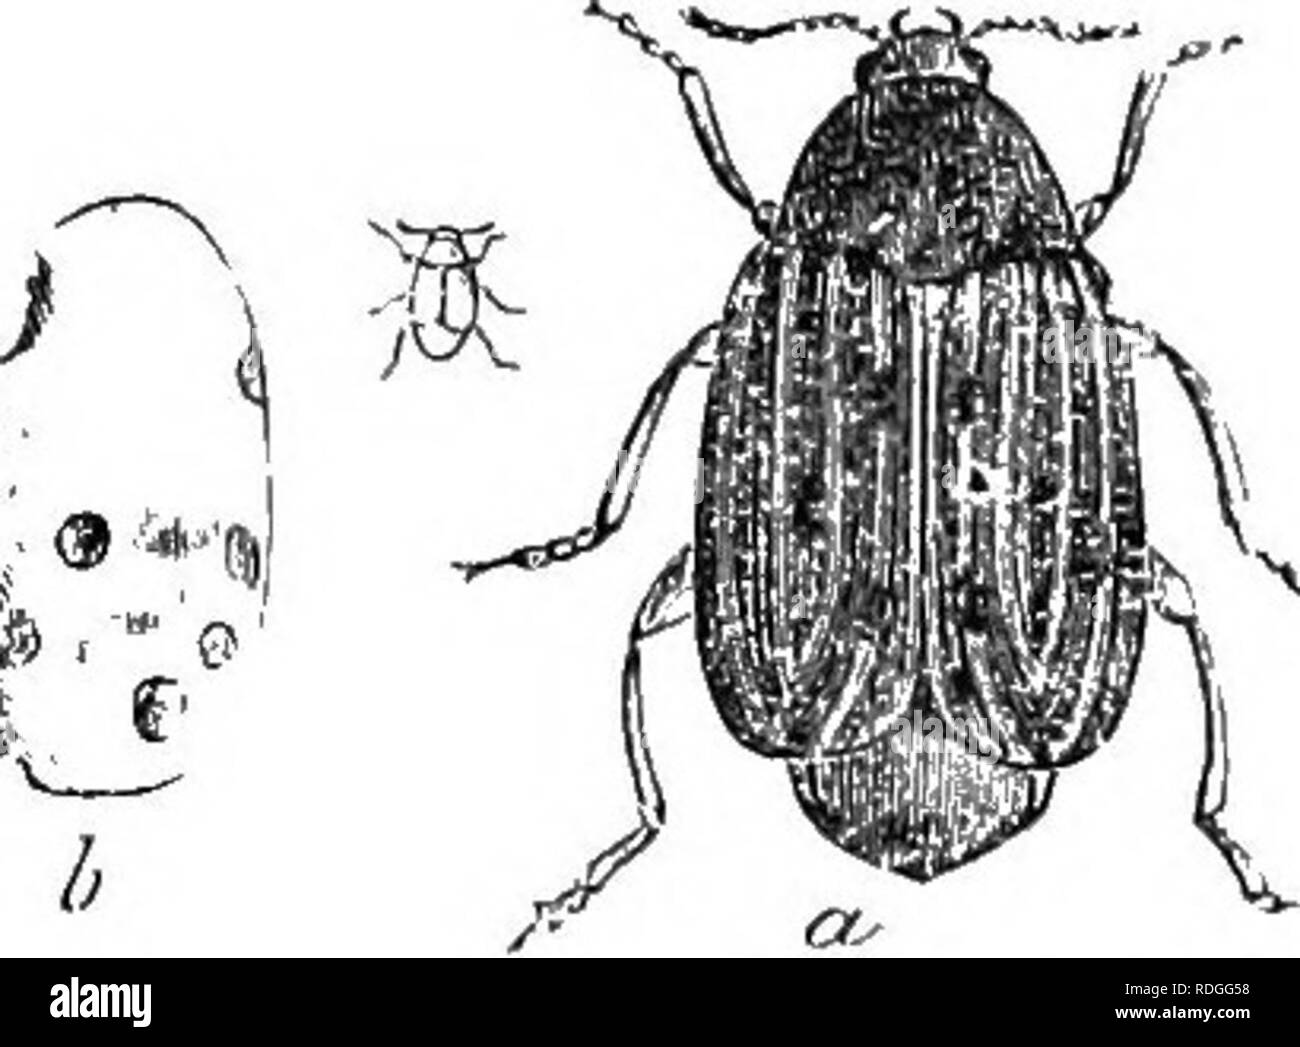 . An illustrated descriptive catalogue of the coleoptera or beetles (exclusive of the Rhynchophora) known to occur in Indiana : with bibliography and descriptions of new species . Beetles. 1240 PAMJI.' LIV. BKUCI-nD,15.. Fig, 558 ;&lt; 7. (Aftor Forbes.) south. April ^O-i Mohev LT). - on the flowers of the black choke-berry (Arovia nigra Willd.). UliOr. (7150). Bki'chts (ip.tectits Sny, Des. N. Am. Cure, 1831, 1; ibid. I, 259. Obloug-oval, moderately robust. Blacli (ir dark piceous, clotbed witb darlv grayish- yellow pubescence, that of elytra interrupted Iiy transverse bauds of darker color; Stock Photo